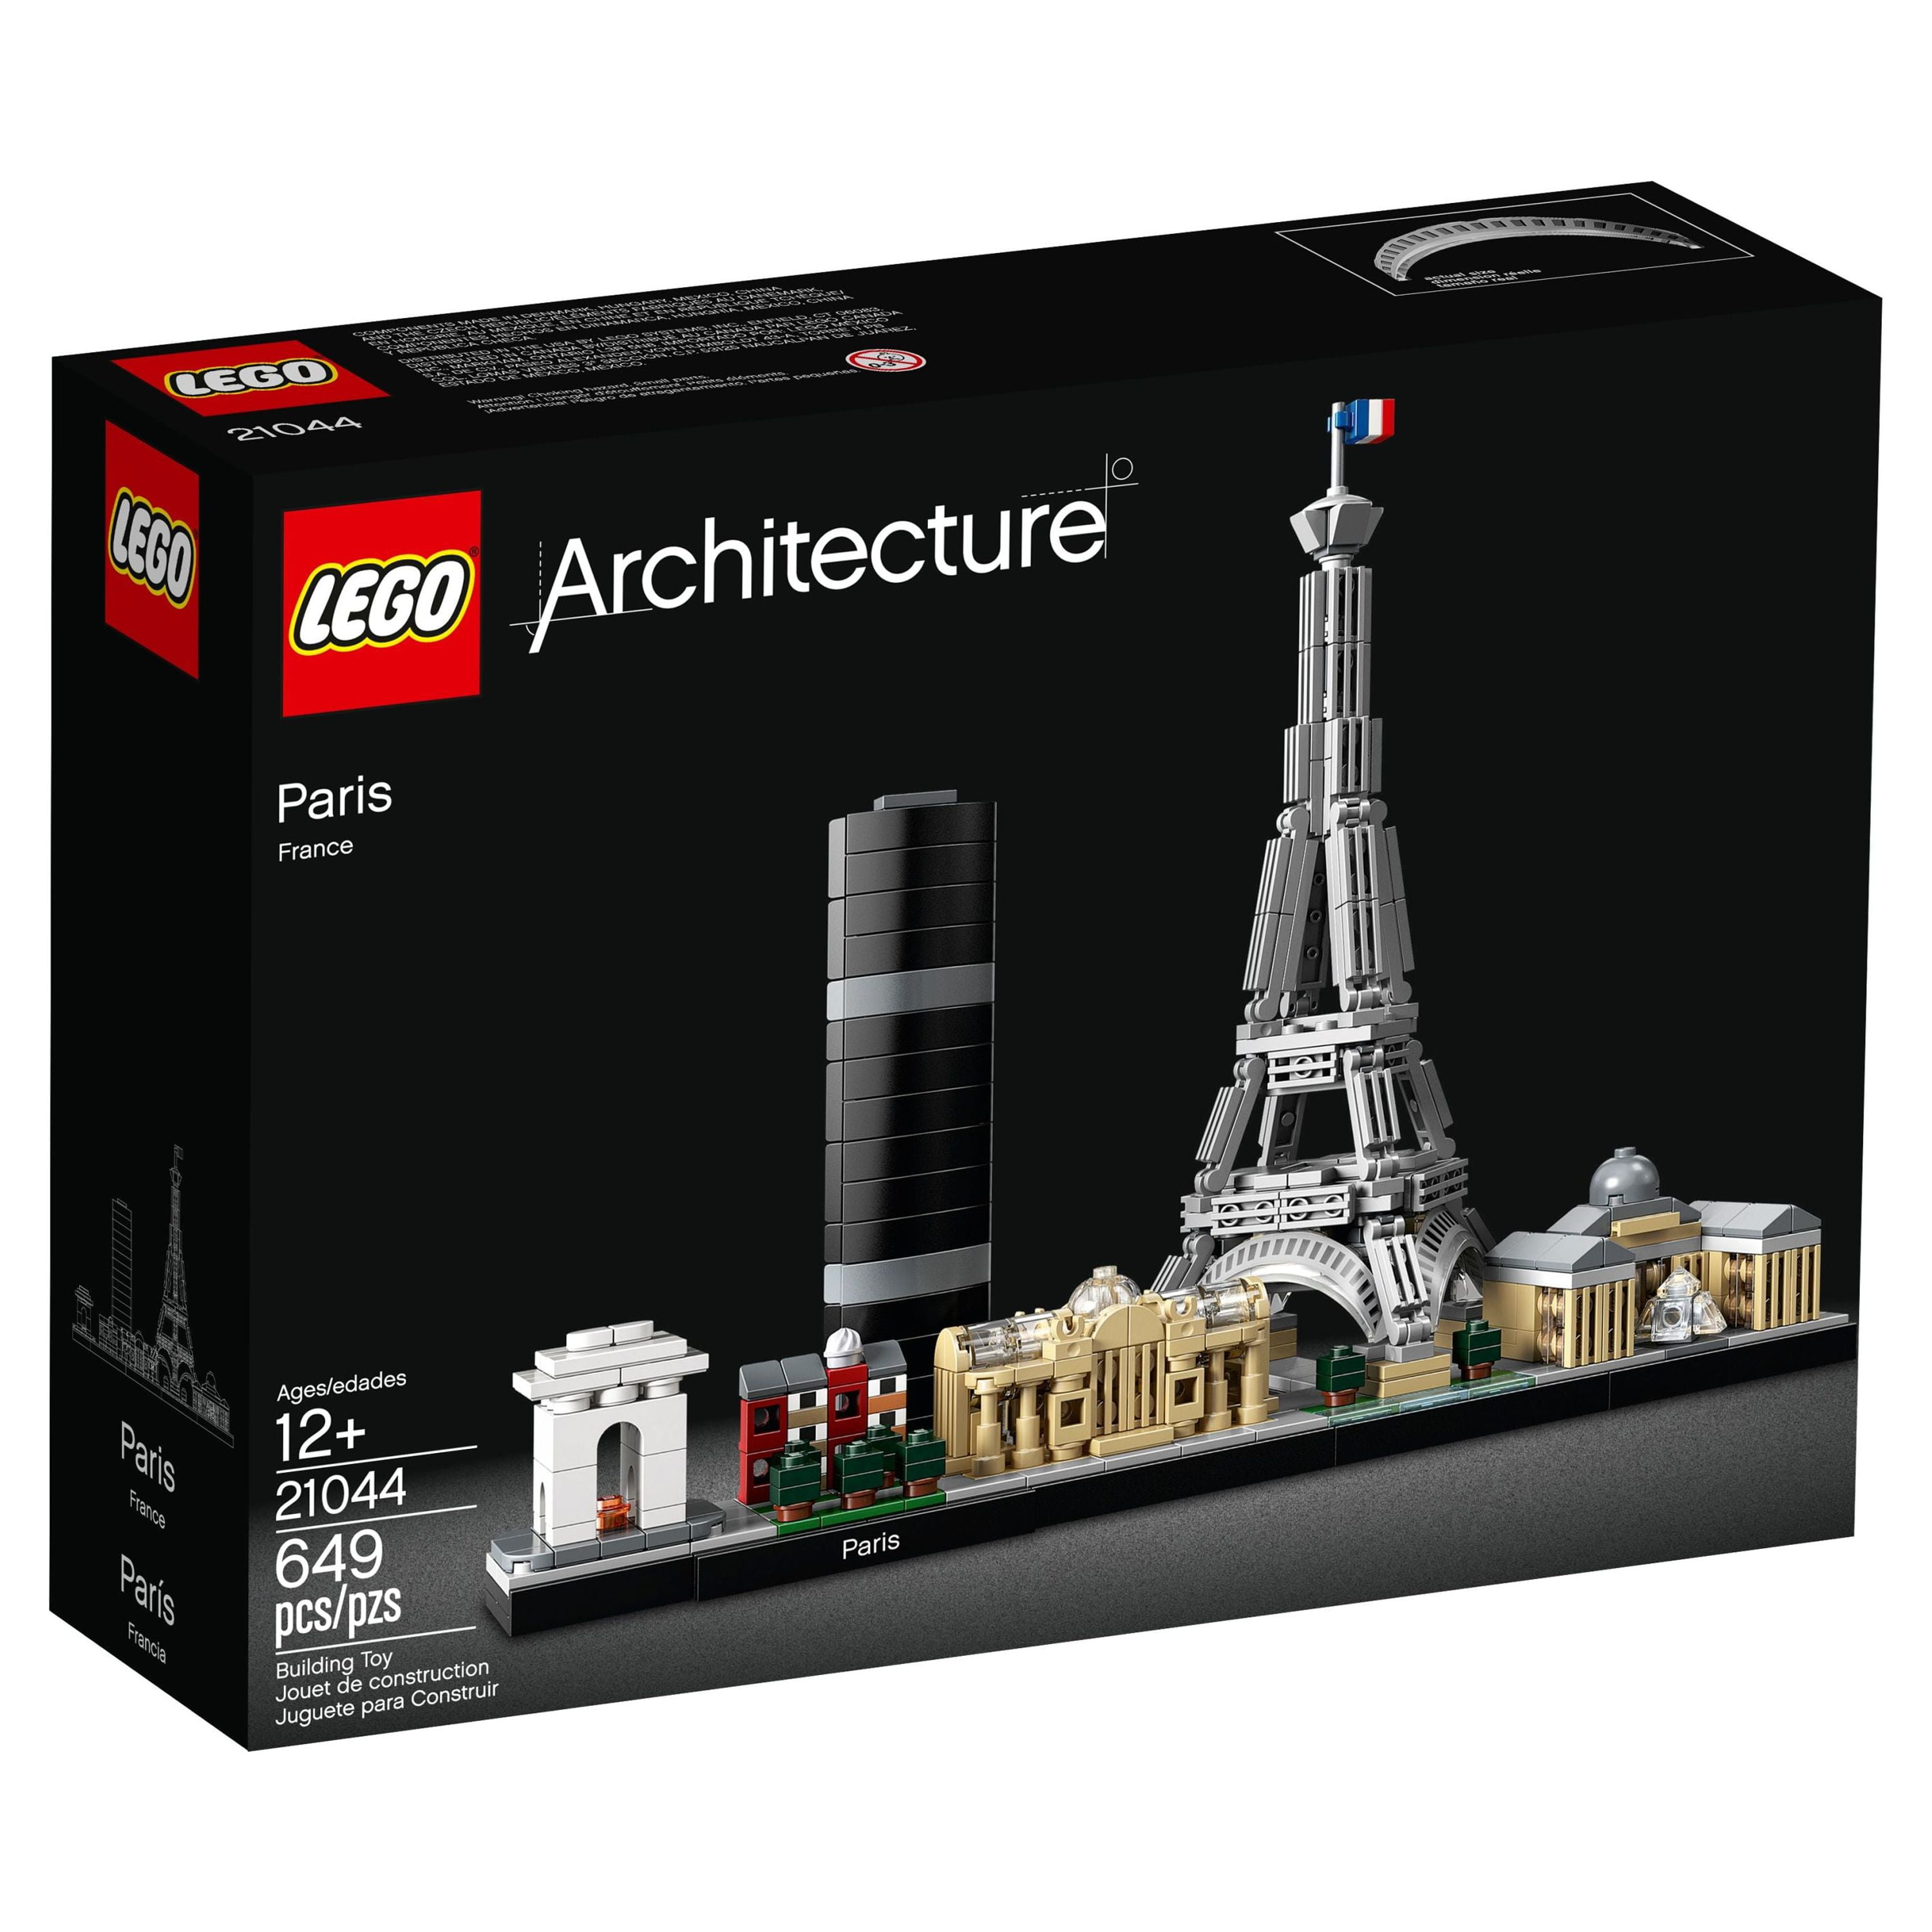 LEGO Architecture Taj Mahal 21056 Building Set - Landmarks Collection,  Display Model, Collectible Home Décor Gift Idea and Model Kits for Adults  and Architects to Build 